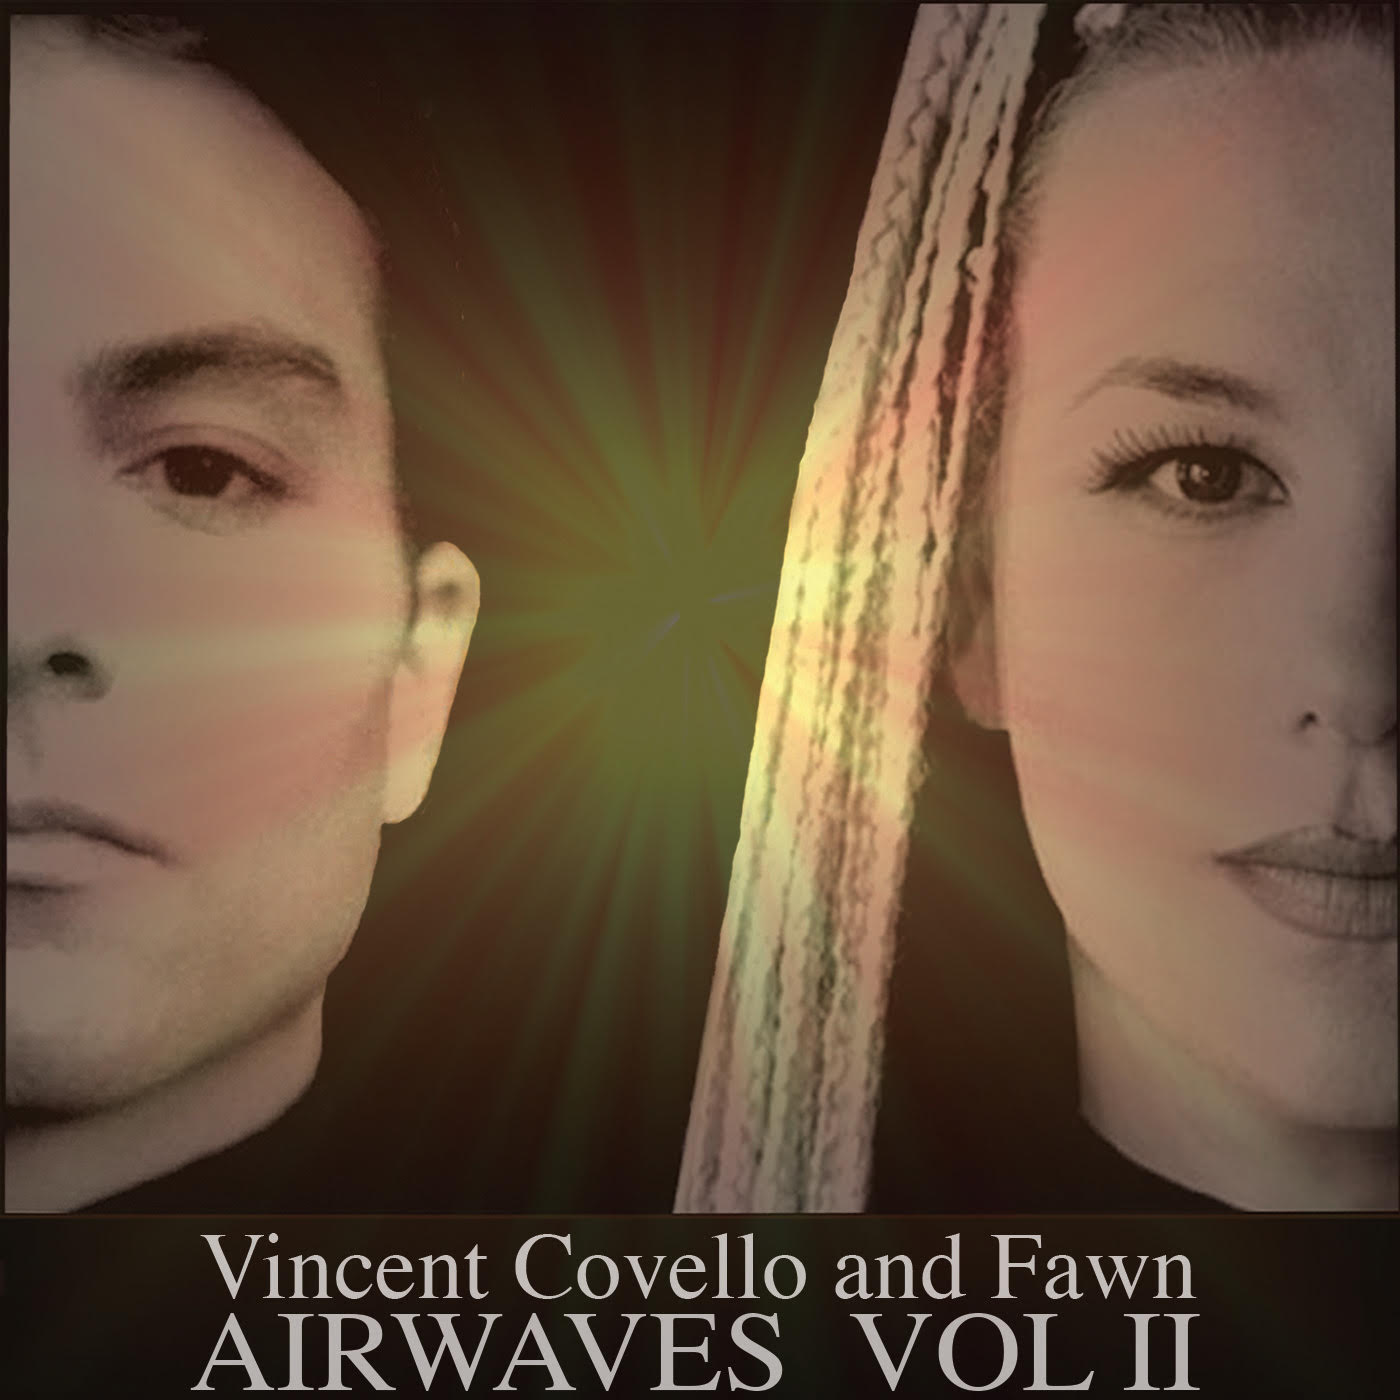 Billboard Hit Recording Artists Vincent Covello and Fawn Release Collection of Film and Television Tracks